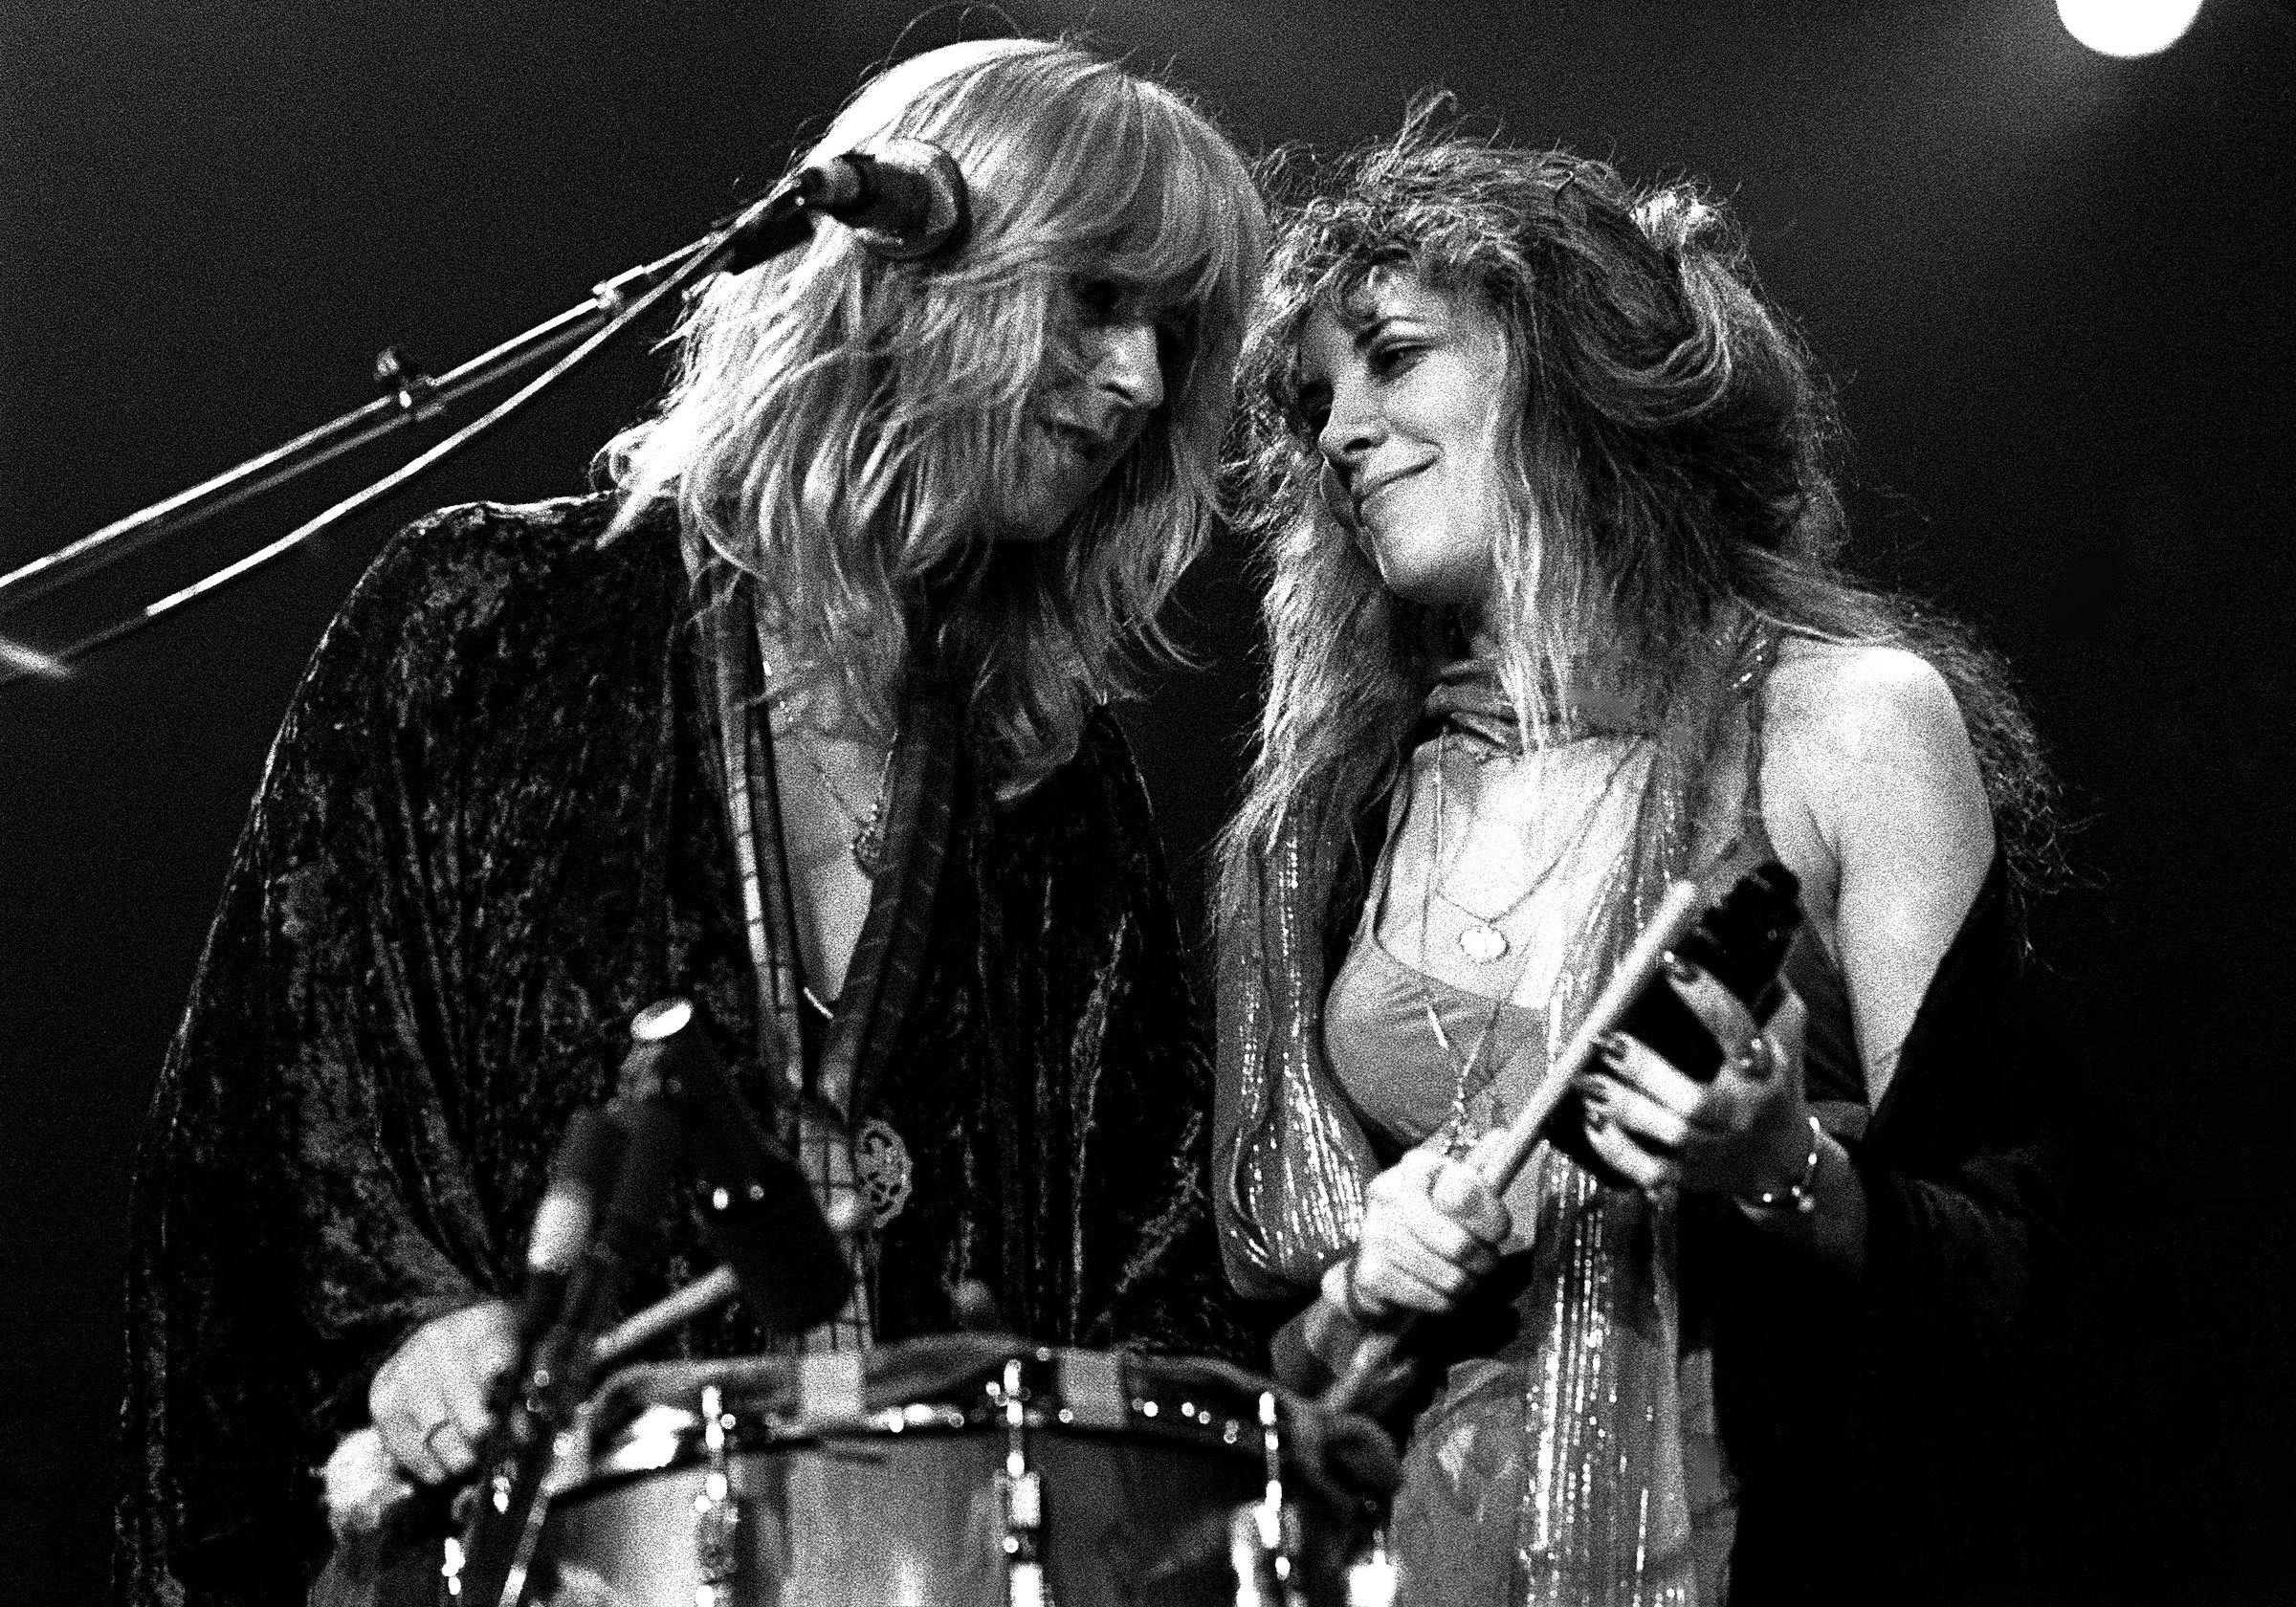 Fleetwood Mac, Rock and Roll Hall of Fame (Class of 1998) Christine McVie and Stevie Nicks perform at The Omni Coliseum